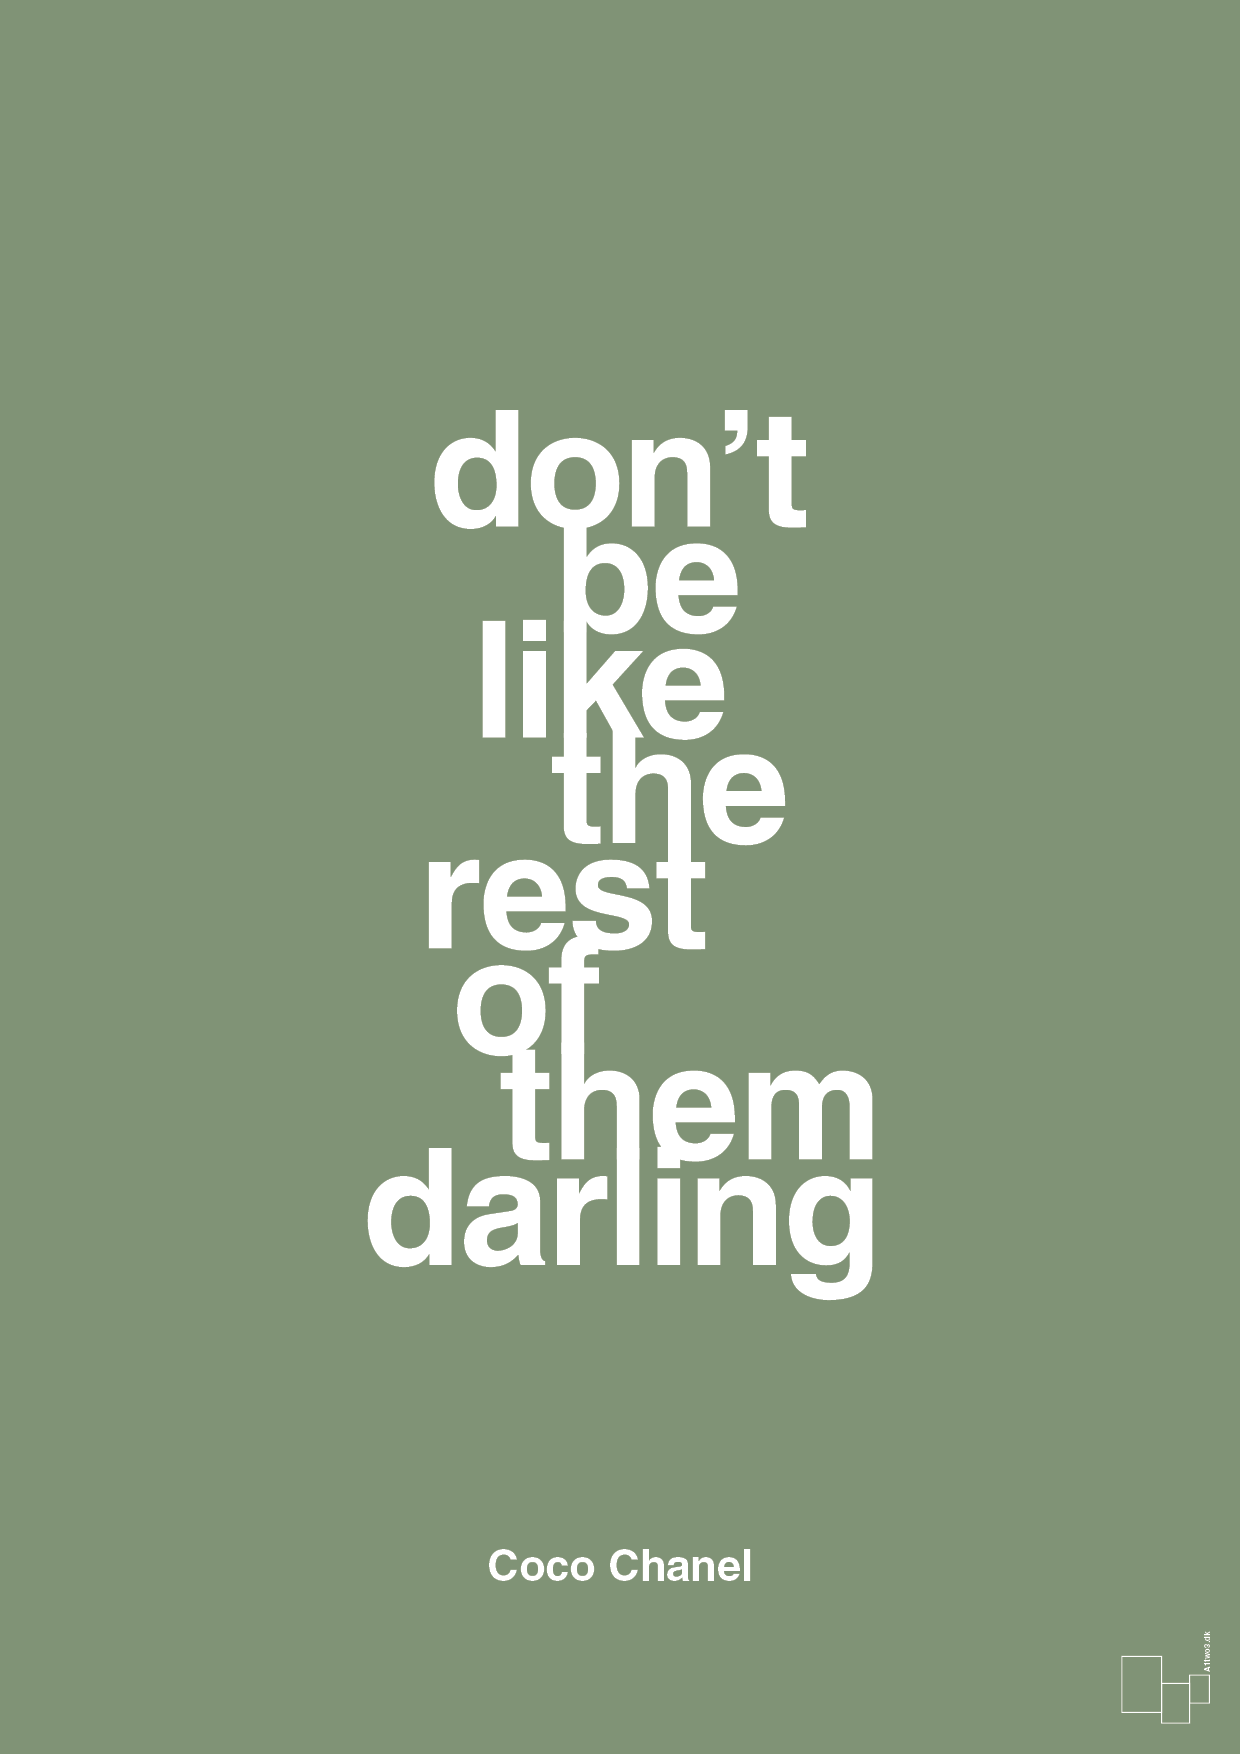 don’t be like the rest of them darling - Plakat med Citater i Jade